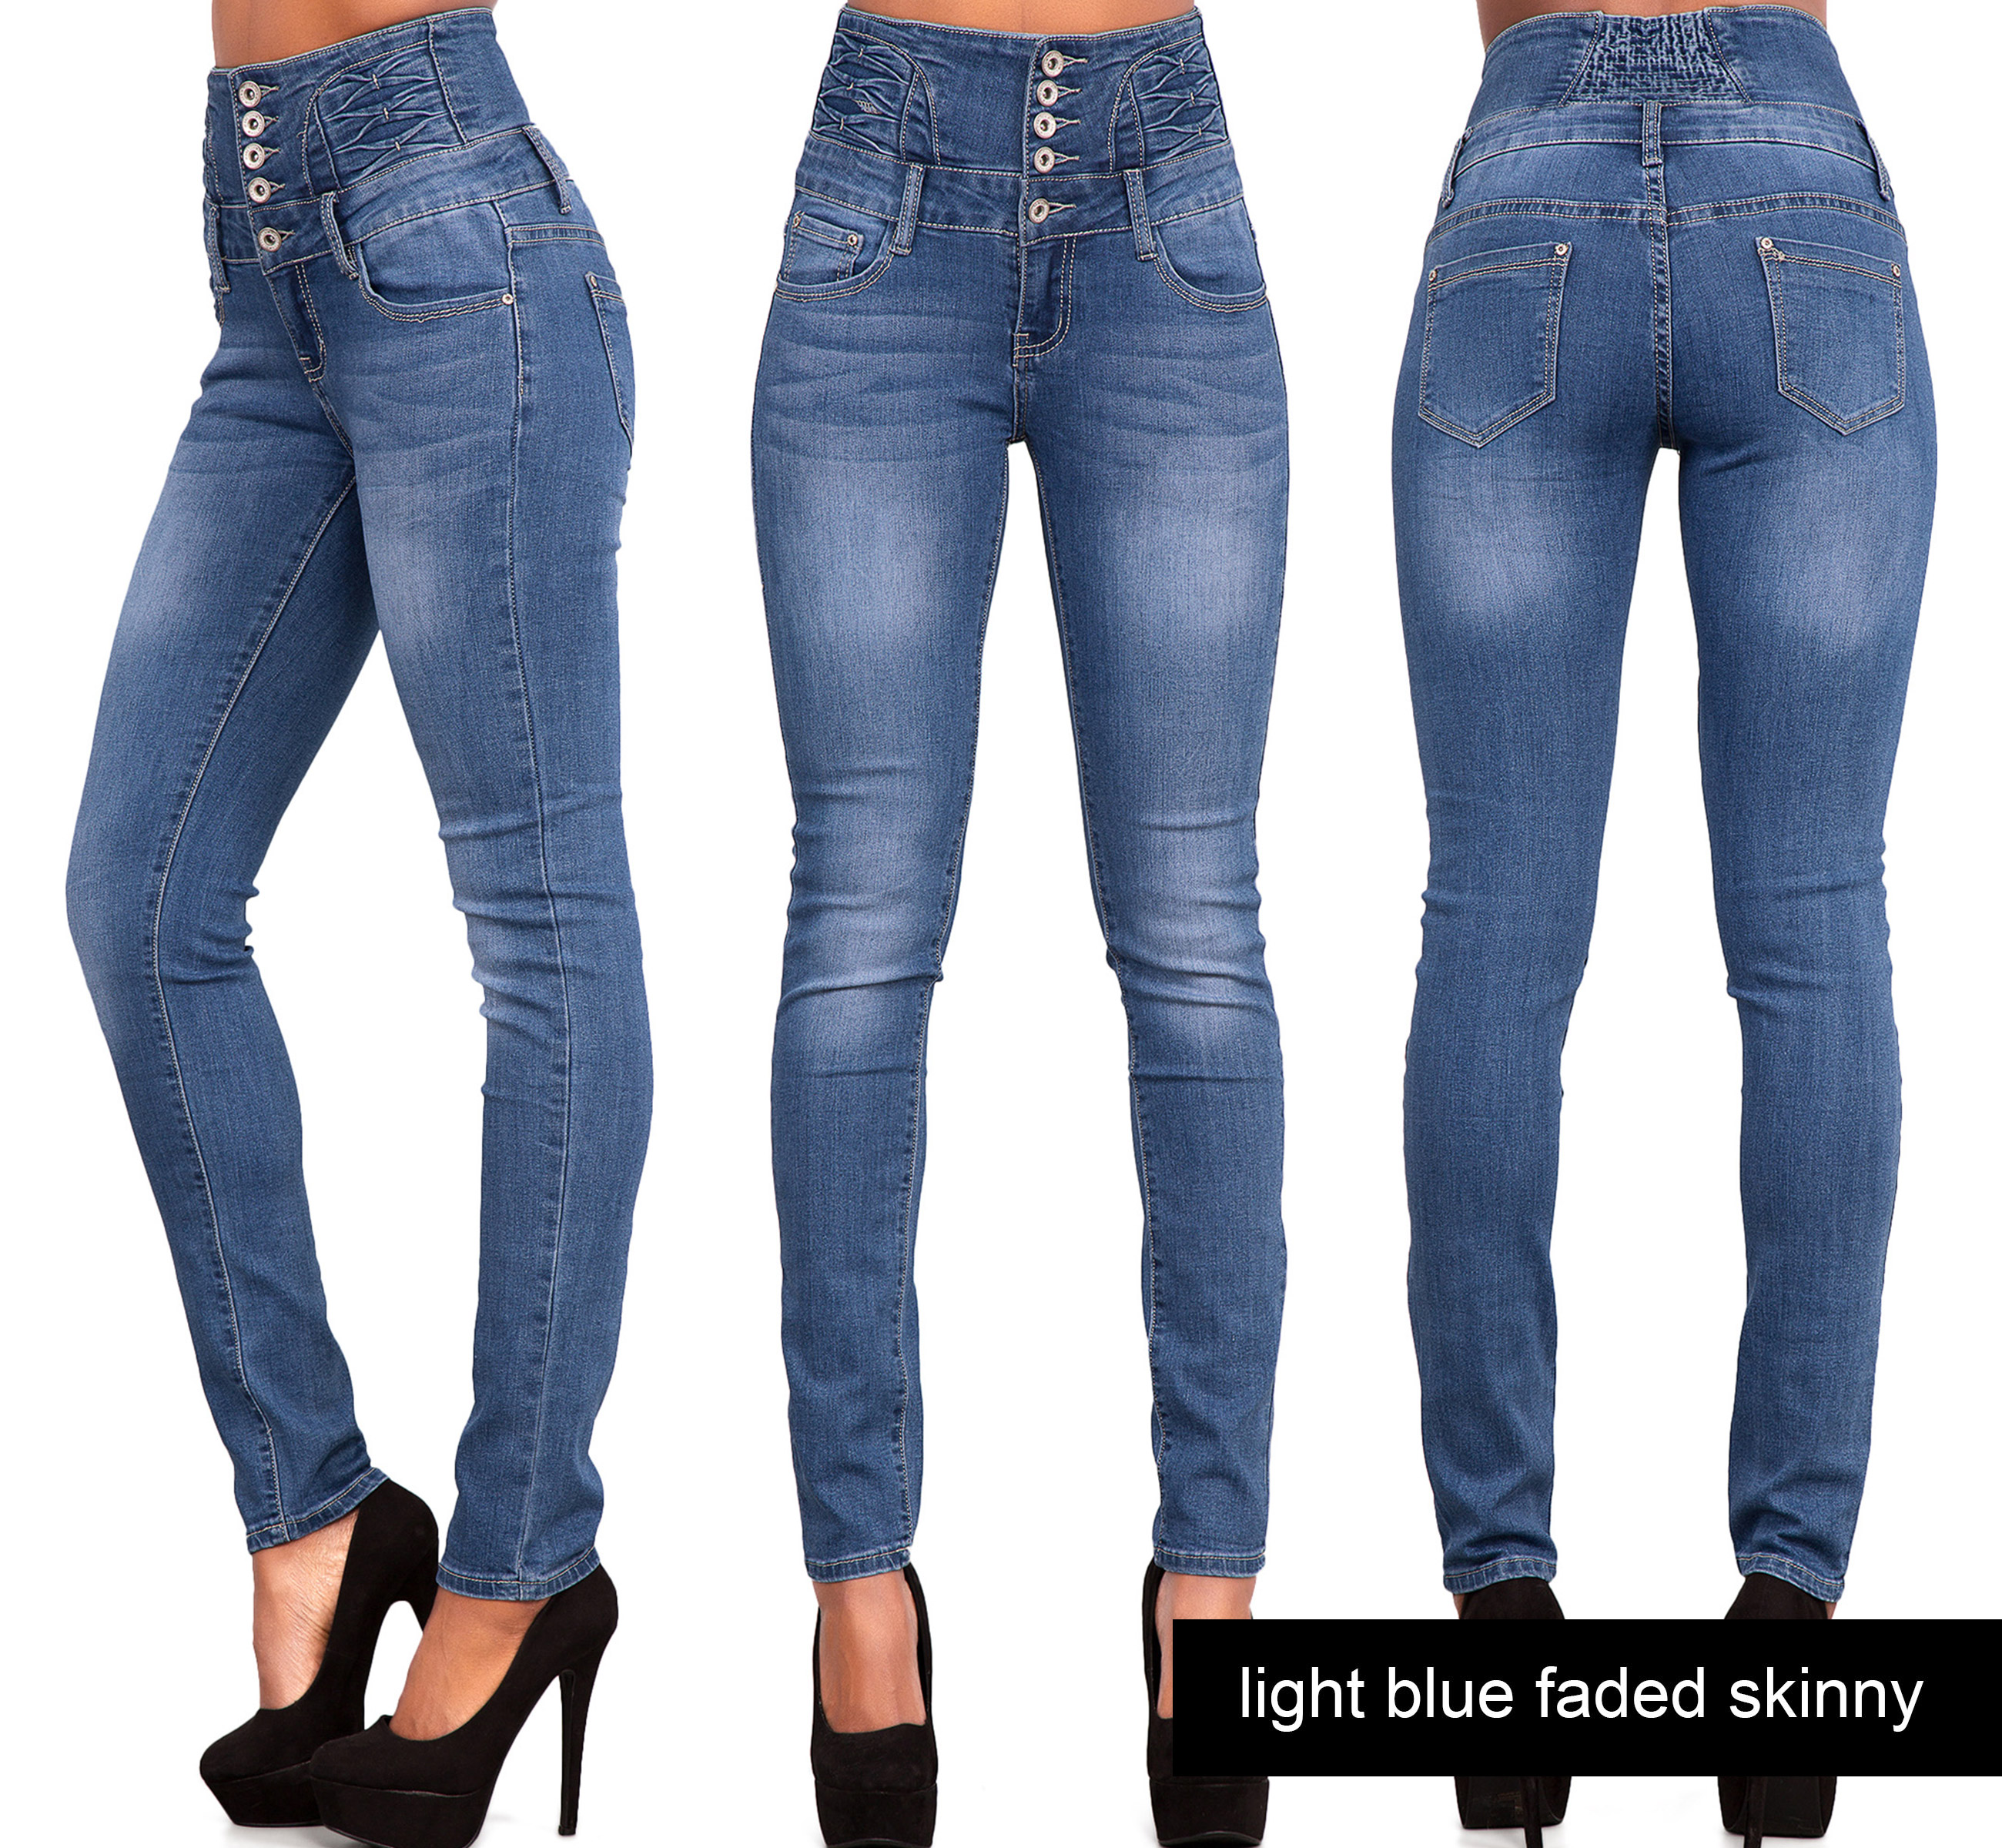 Womens Ladies High Waisted Blue Skinny Fit Jeans Stretch Denim Jegging ...